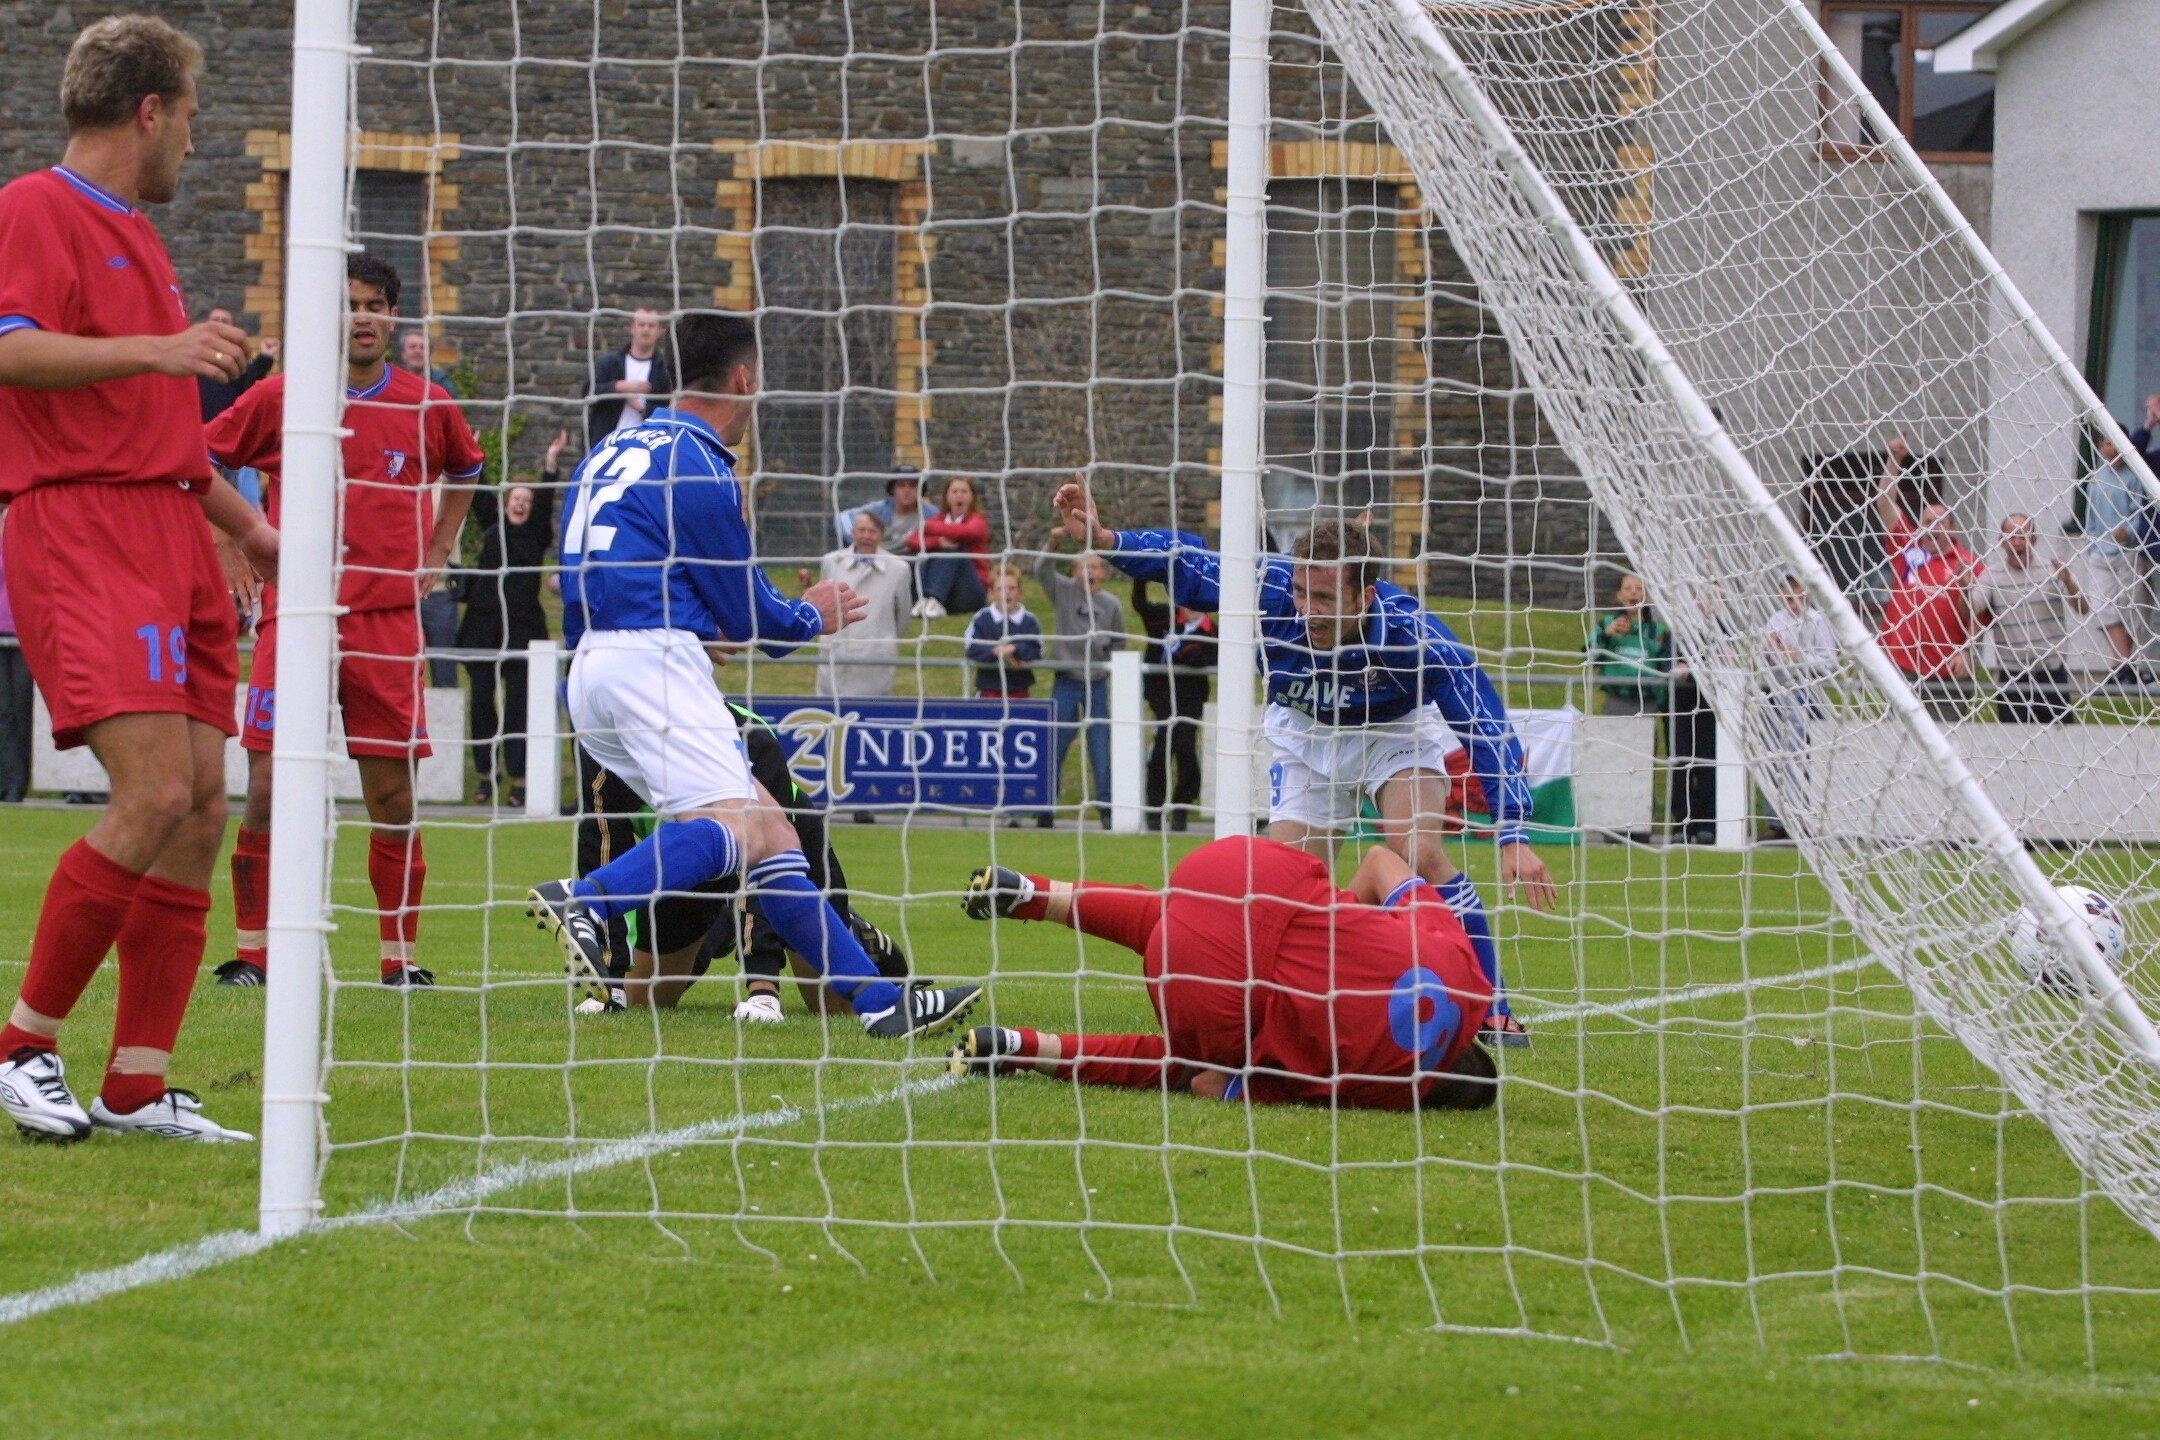 Graham Evans scores for Caersws against PFC Marek in the Inter Toto Cup. Pic by Phil Blagg